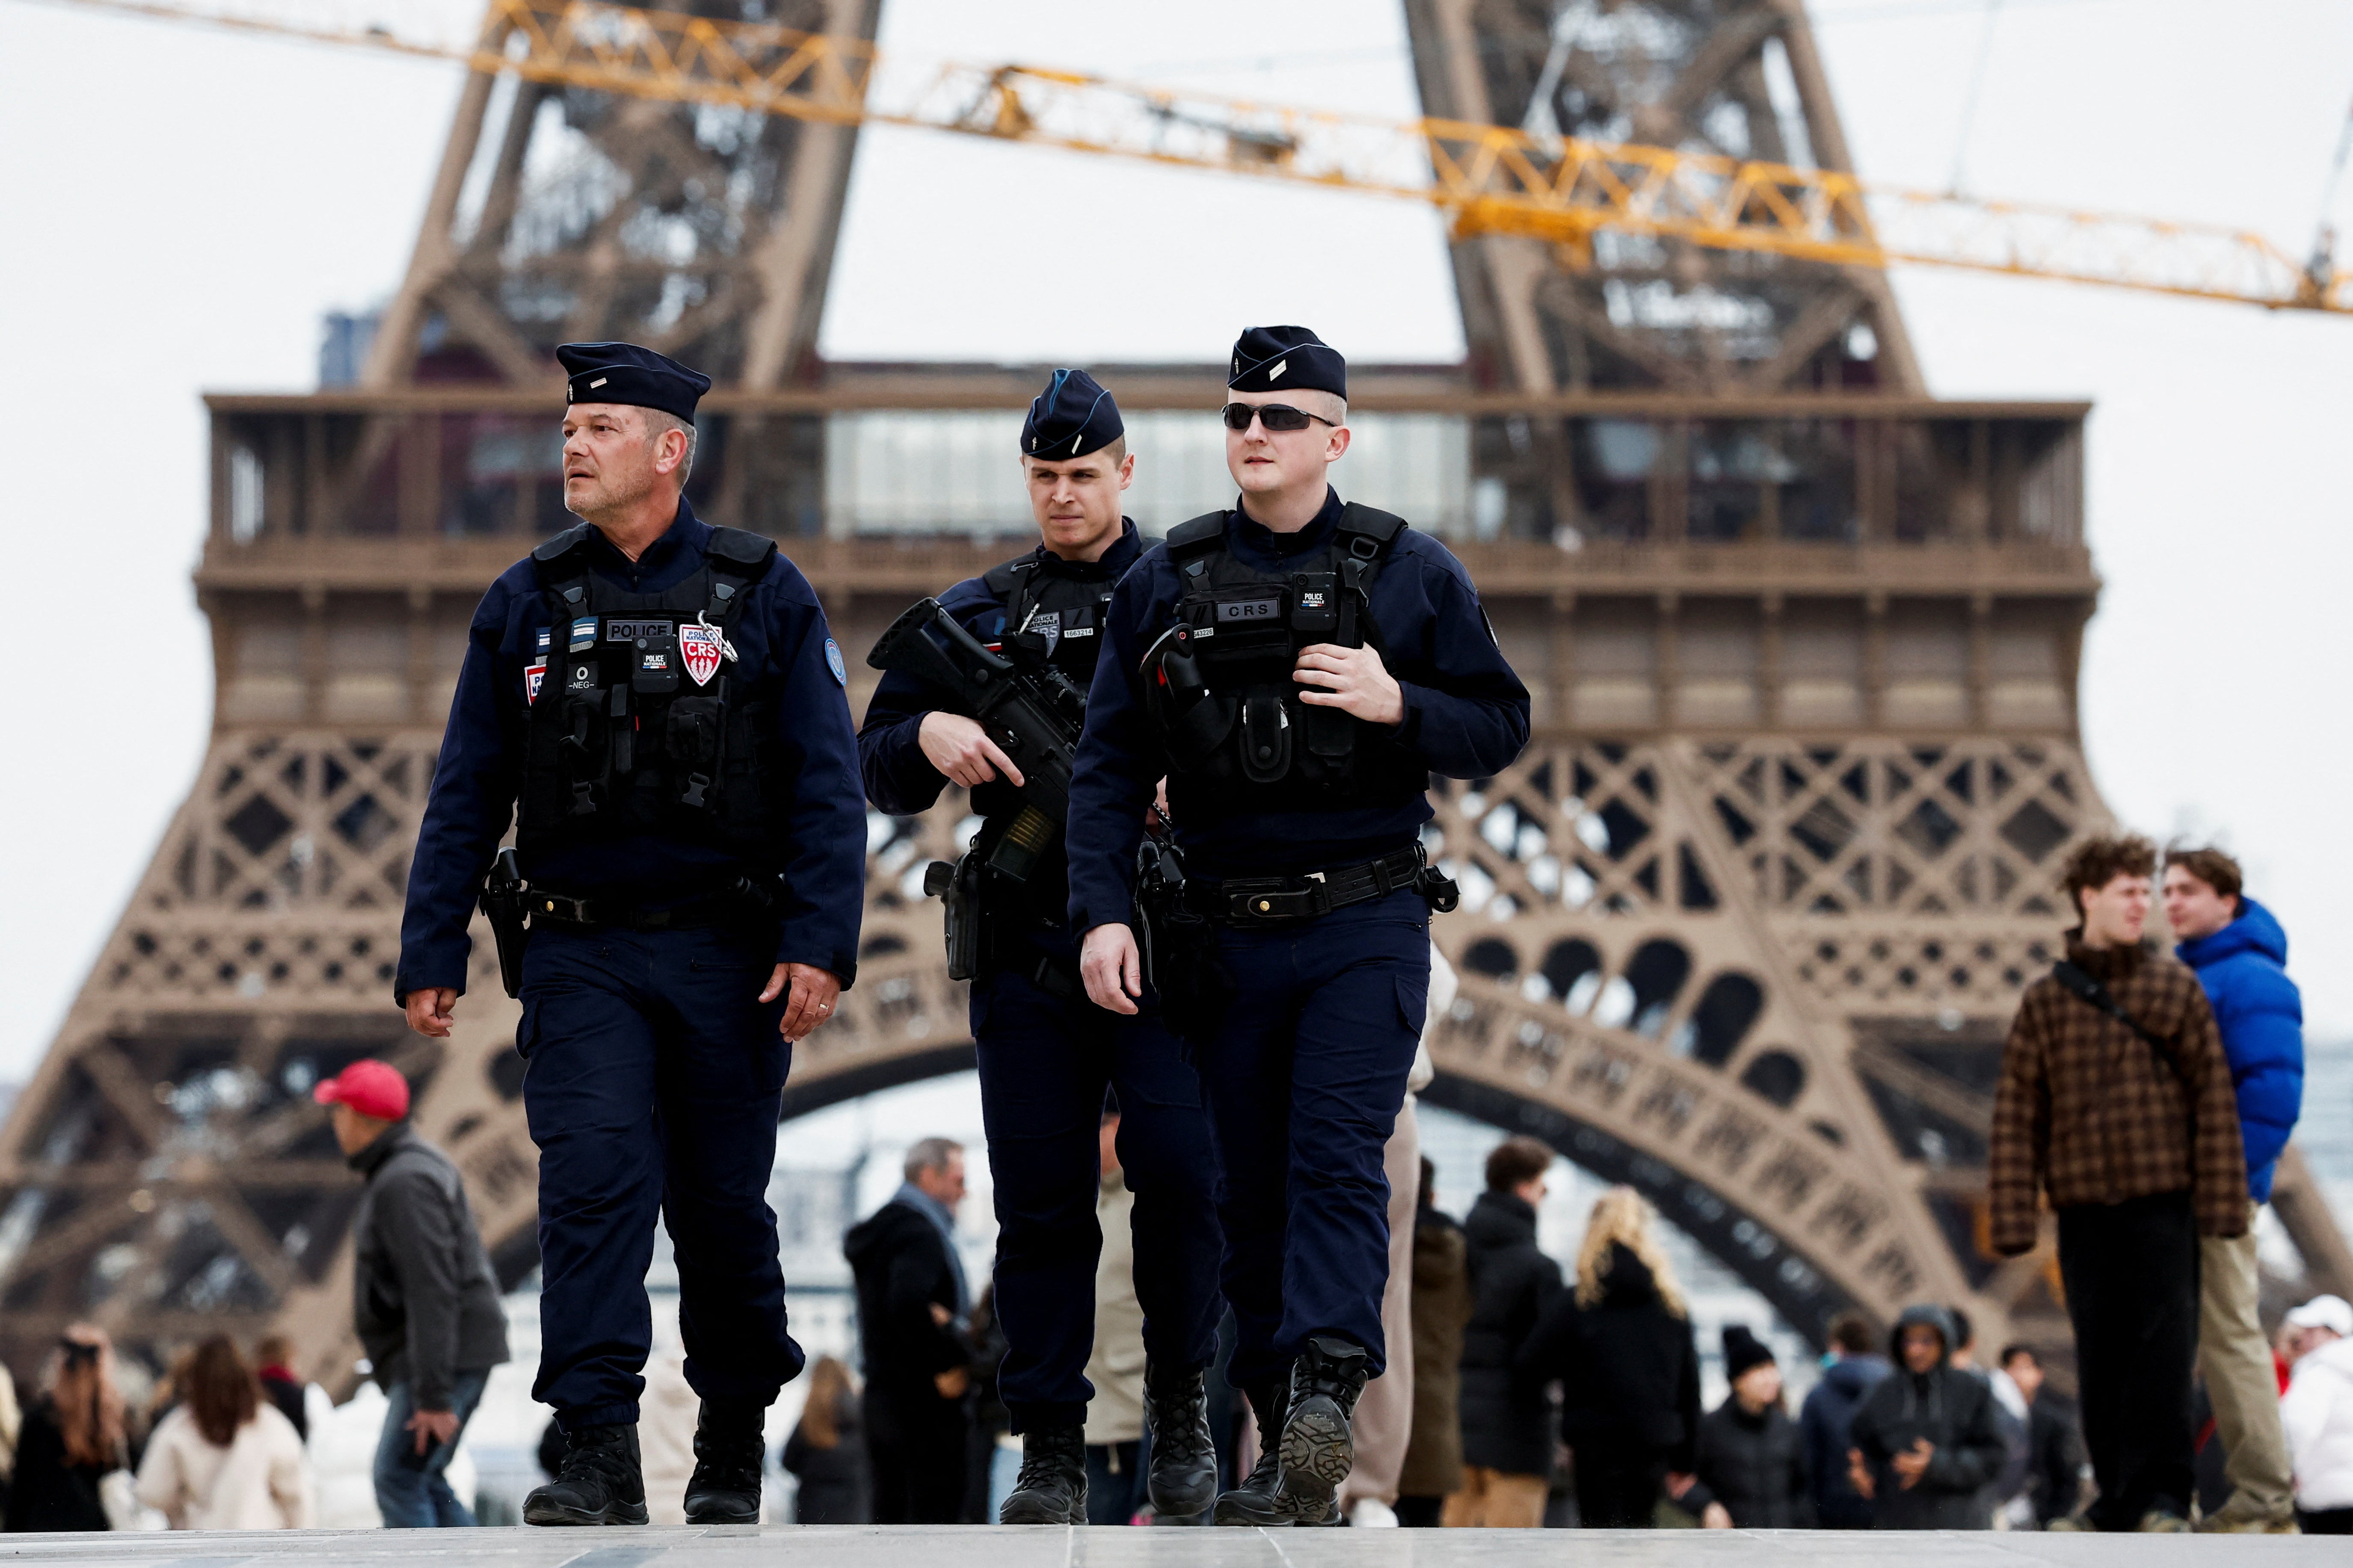 France has raised its terror alert warning to the highest level after the Moscow attack